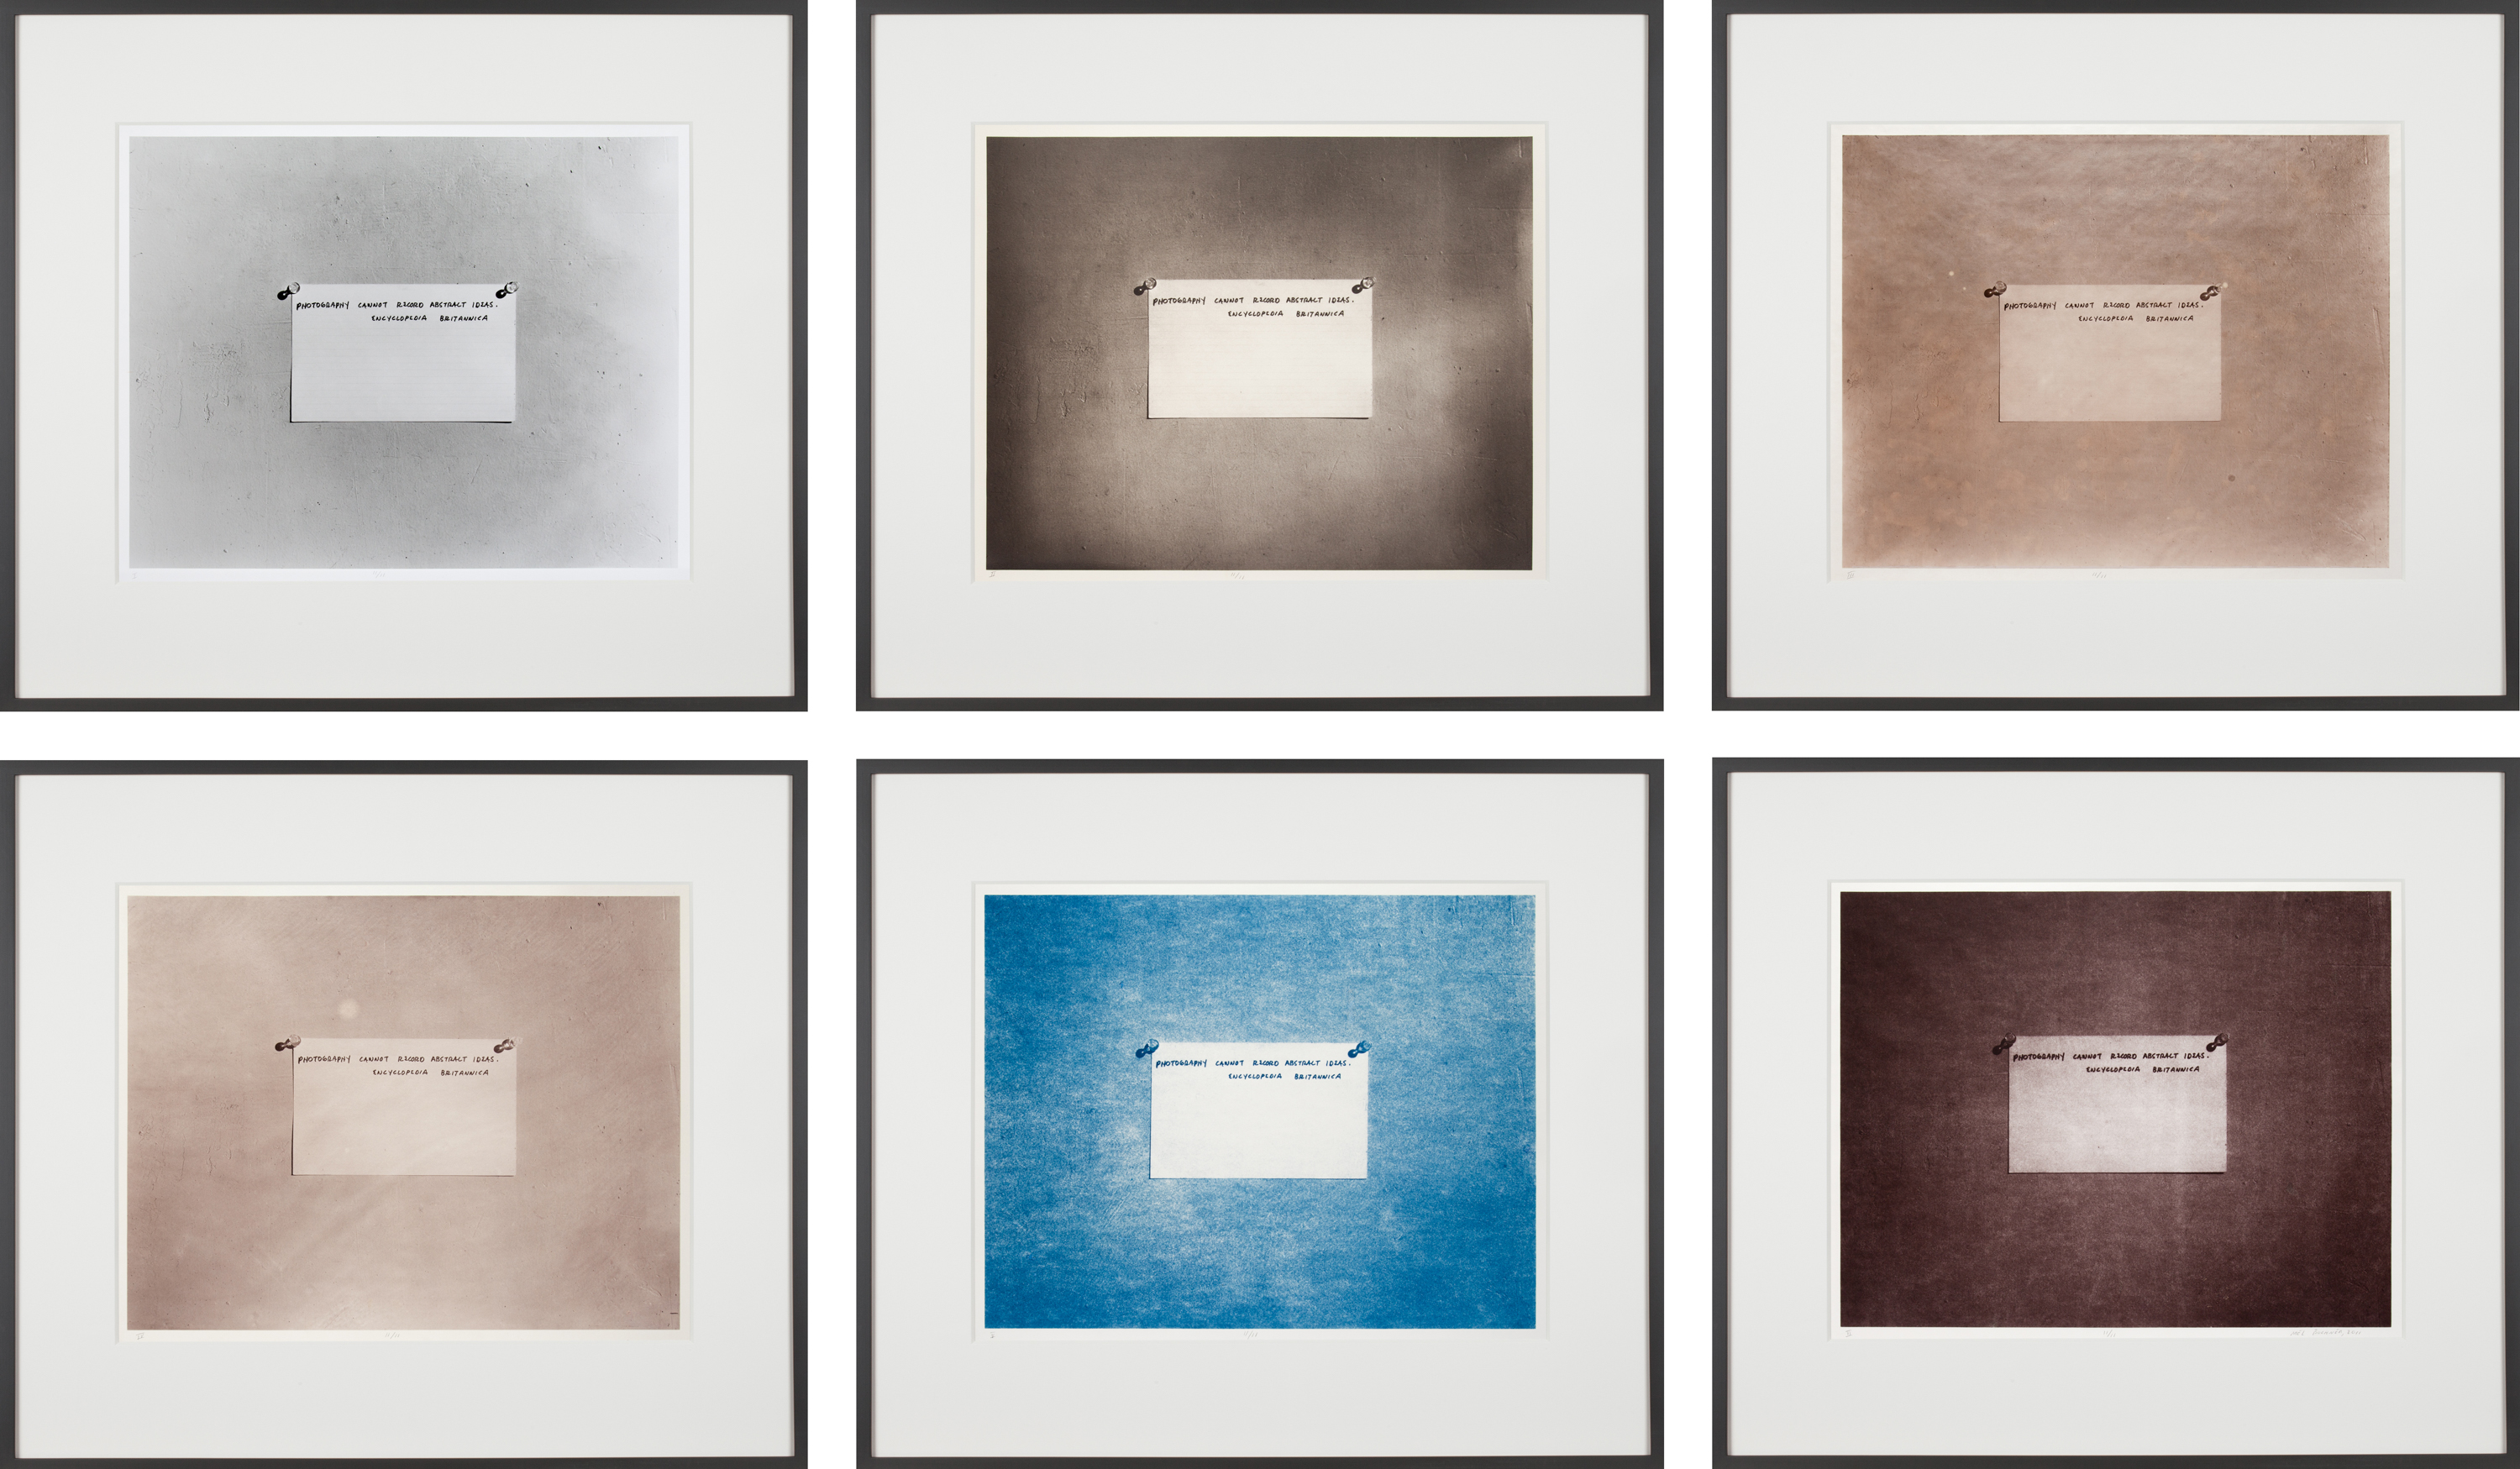 Color image of a suite of six photographs depicting a note on a wall each work printed in various methods